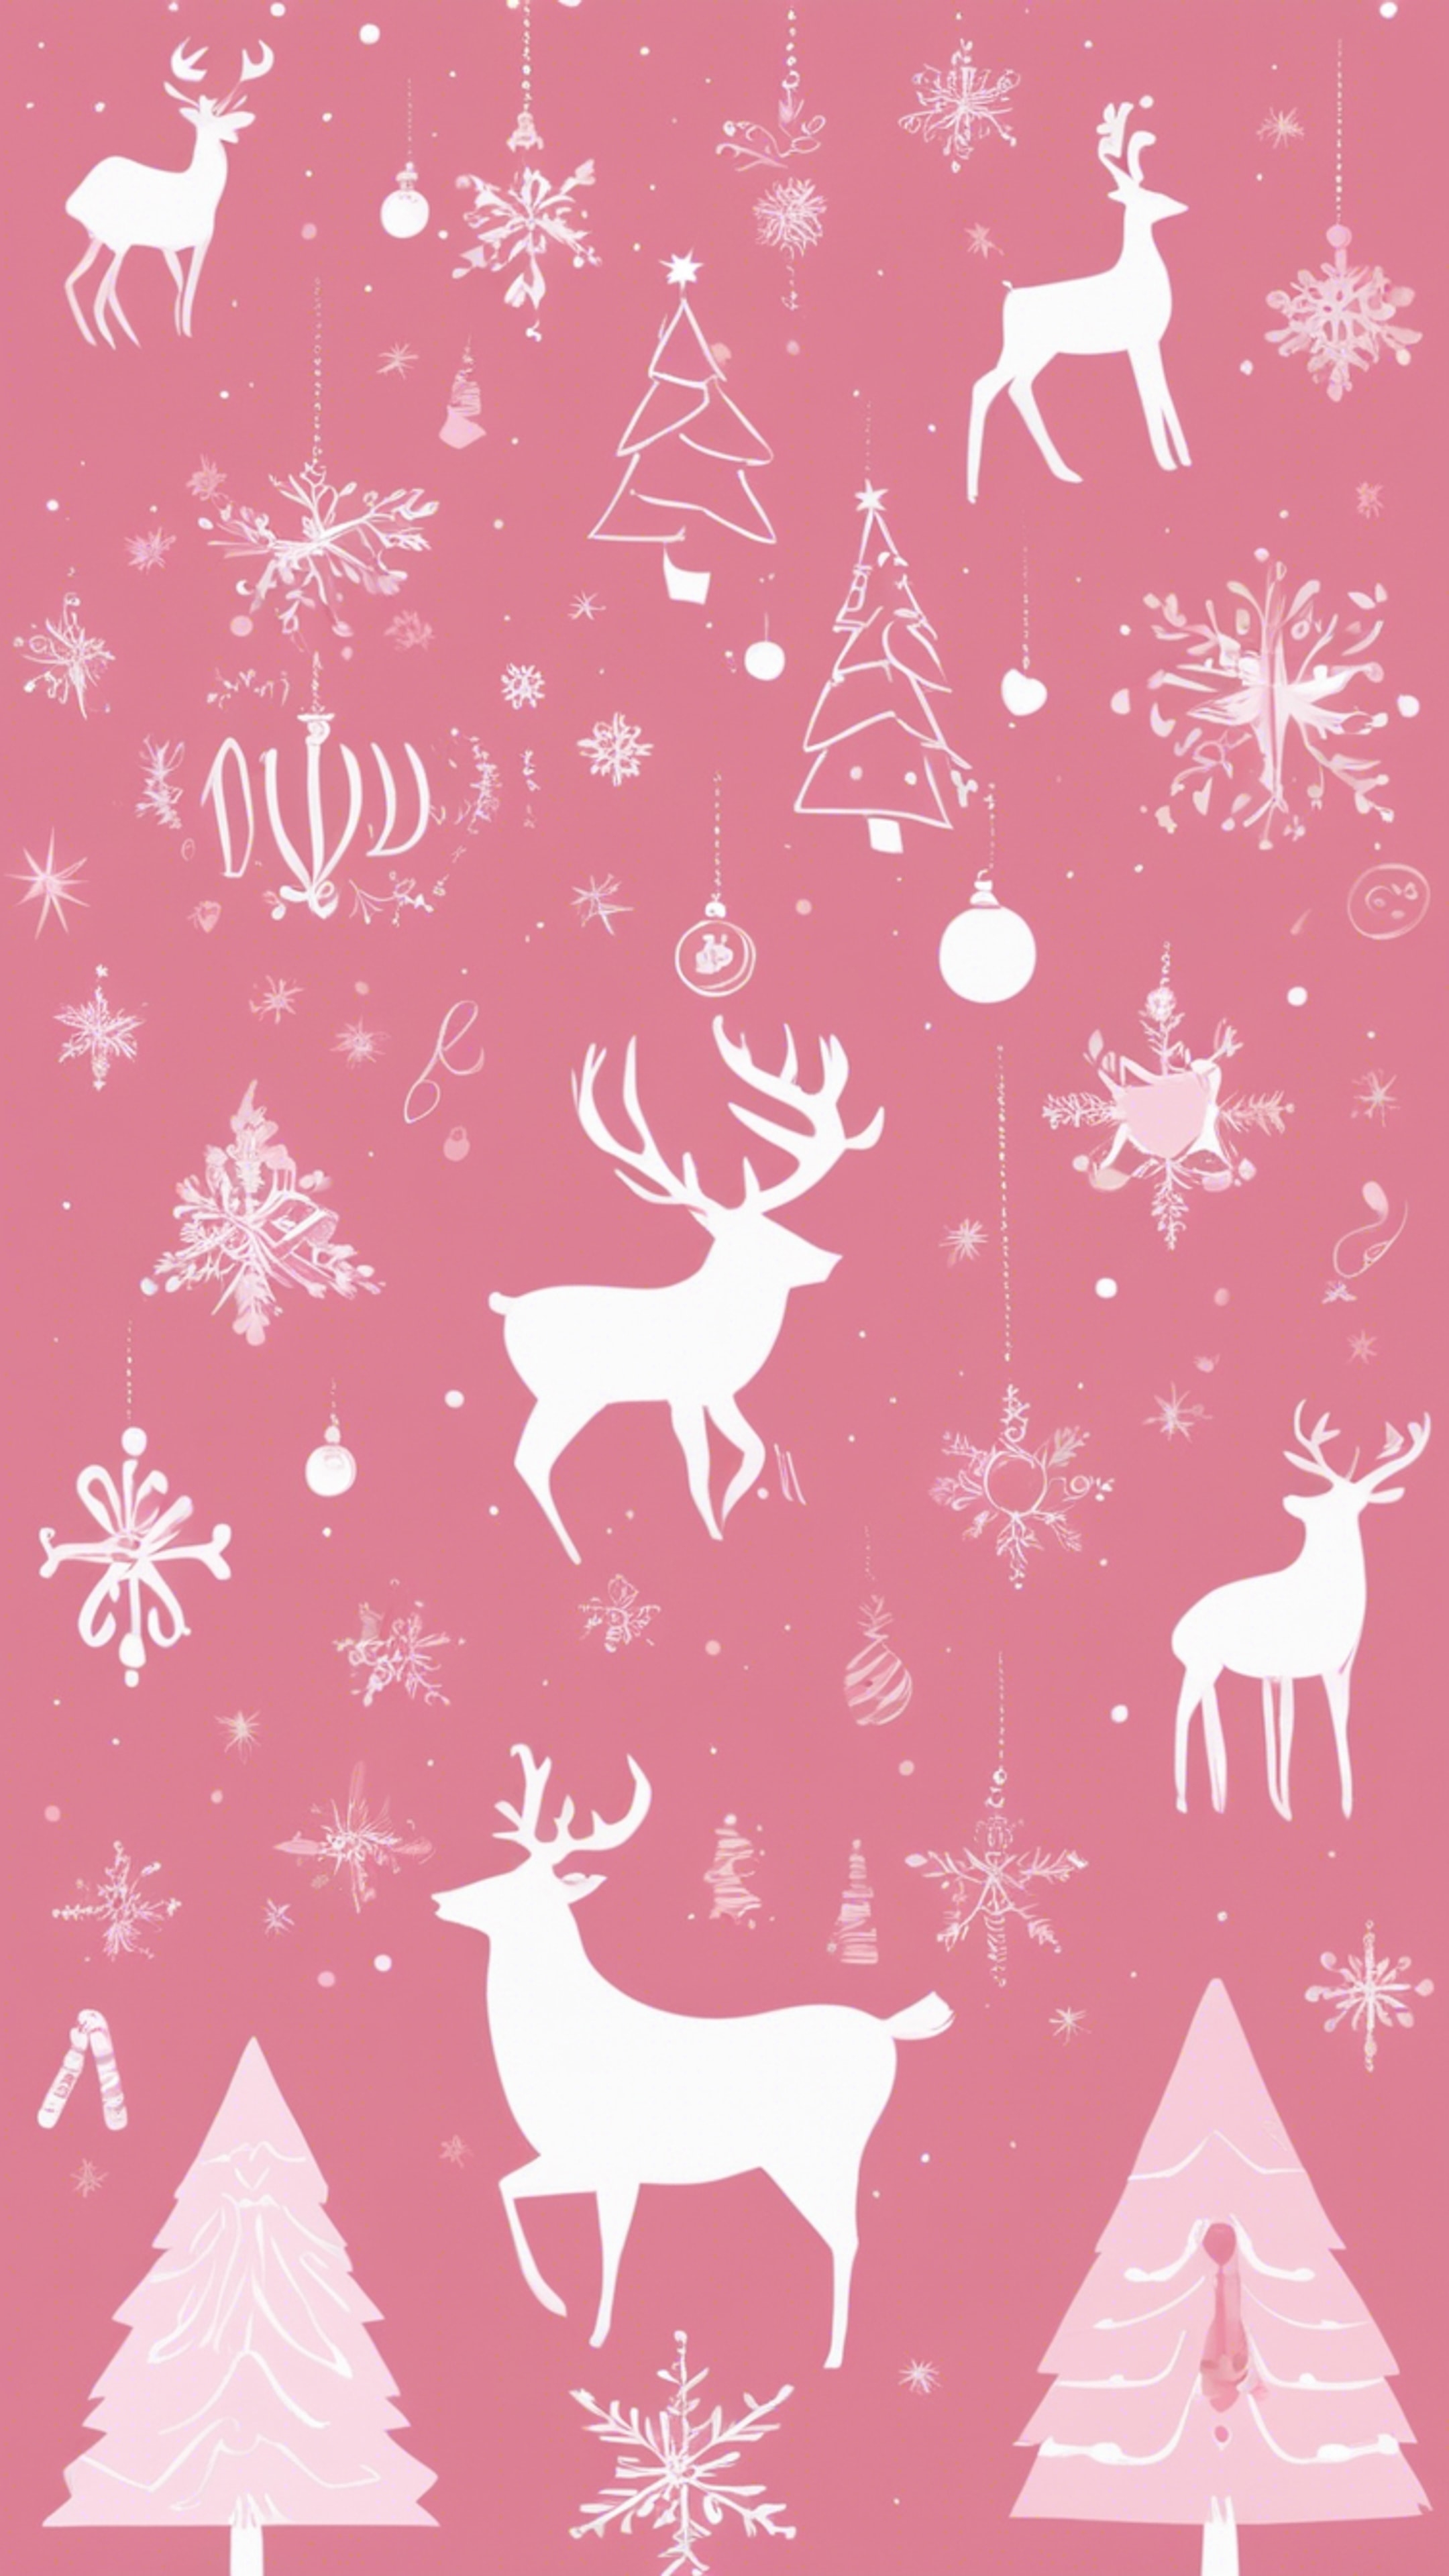 A minimally designed Christmas card with elegant pink illustrations of Christmas icons. Wallpaper[9459a801713f4624aabe]